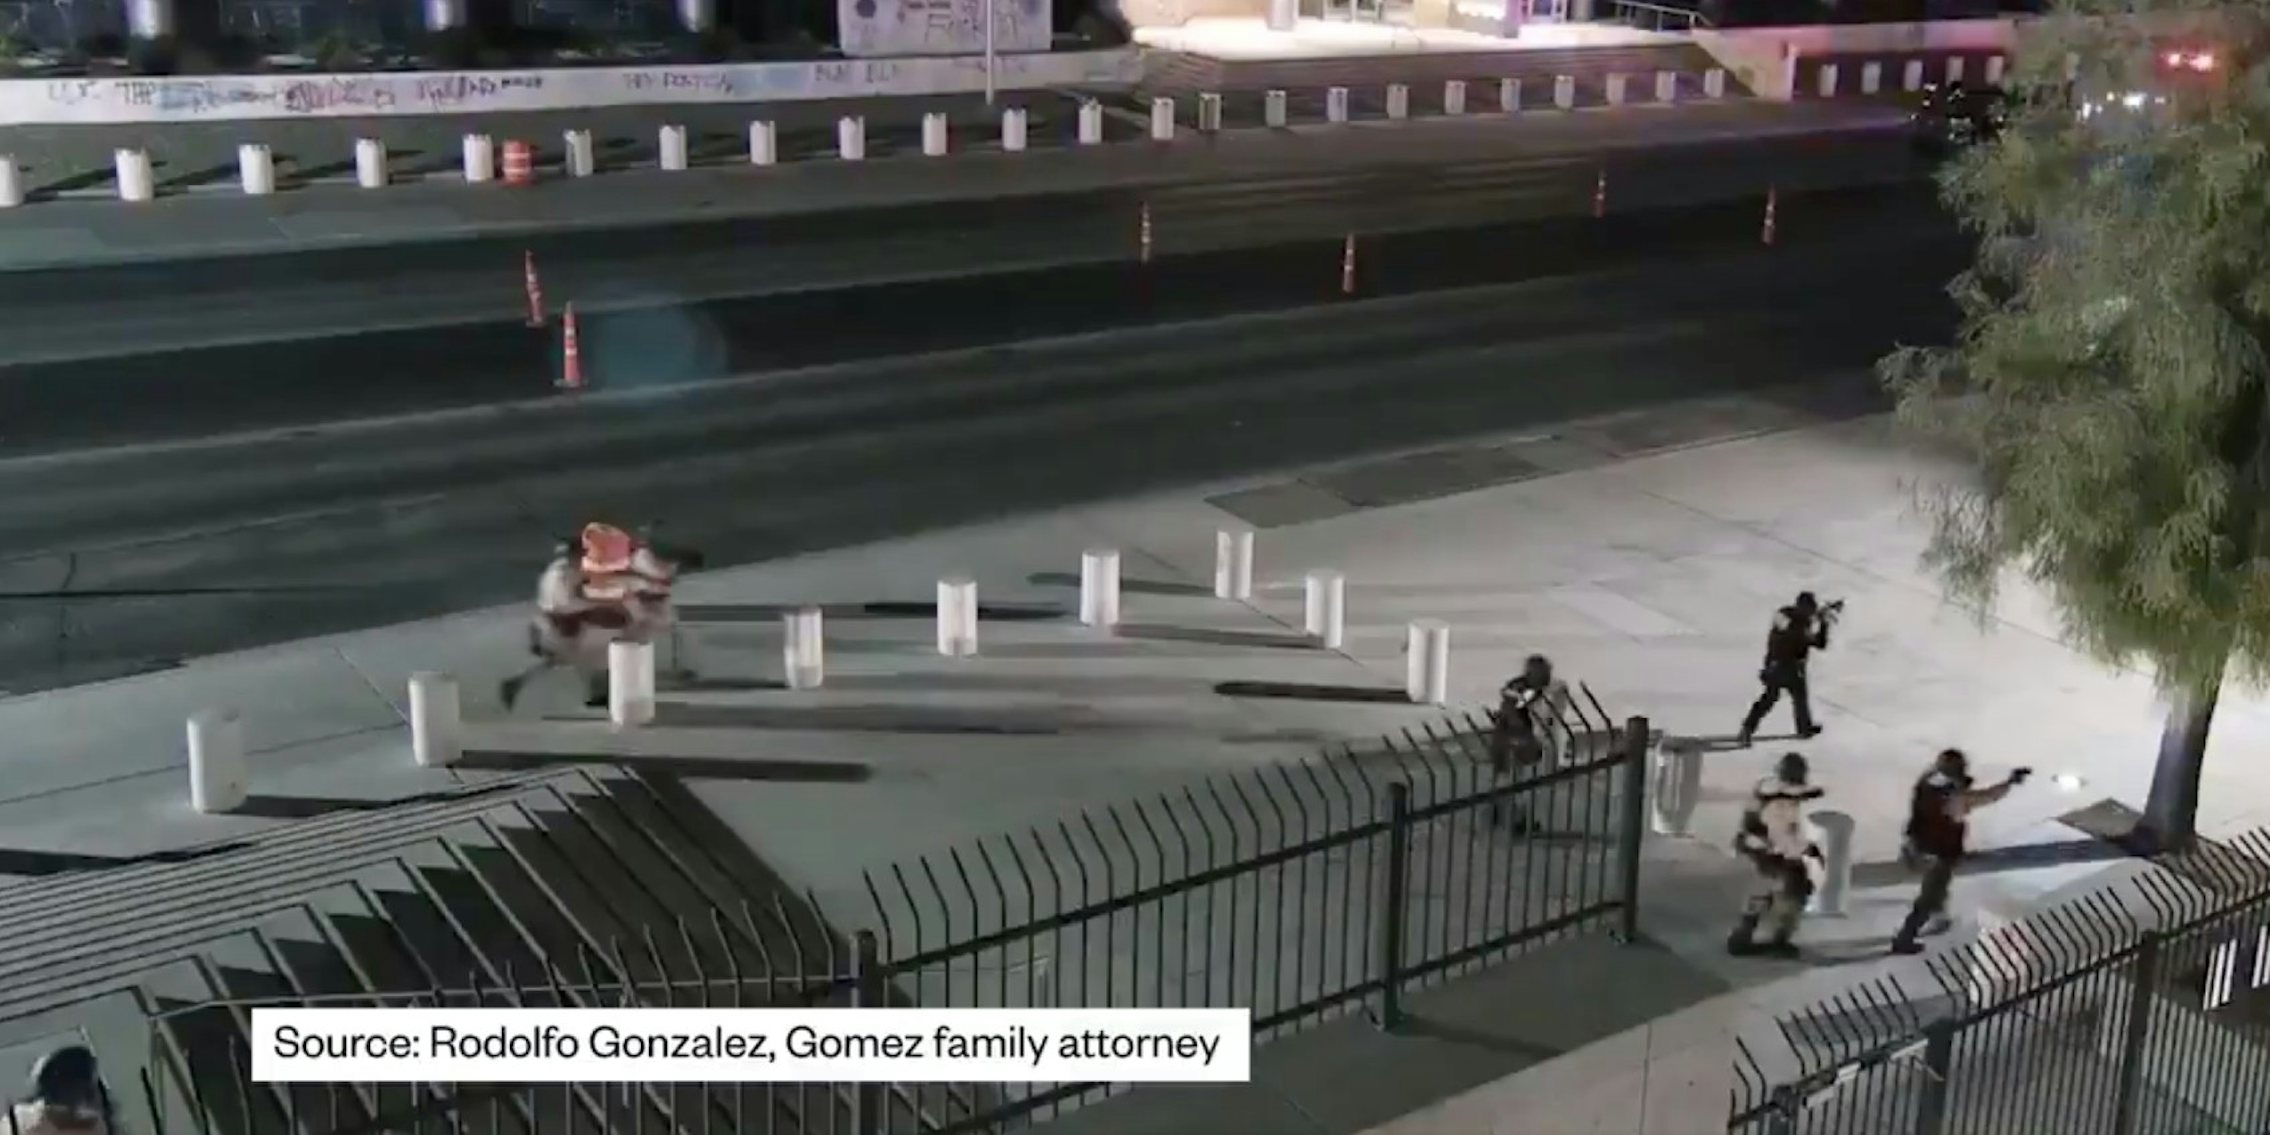 Video shows Jorge Gomez being chased by officers in riot gears